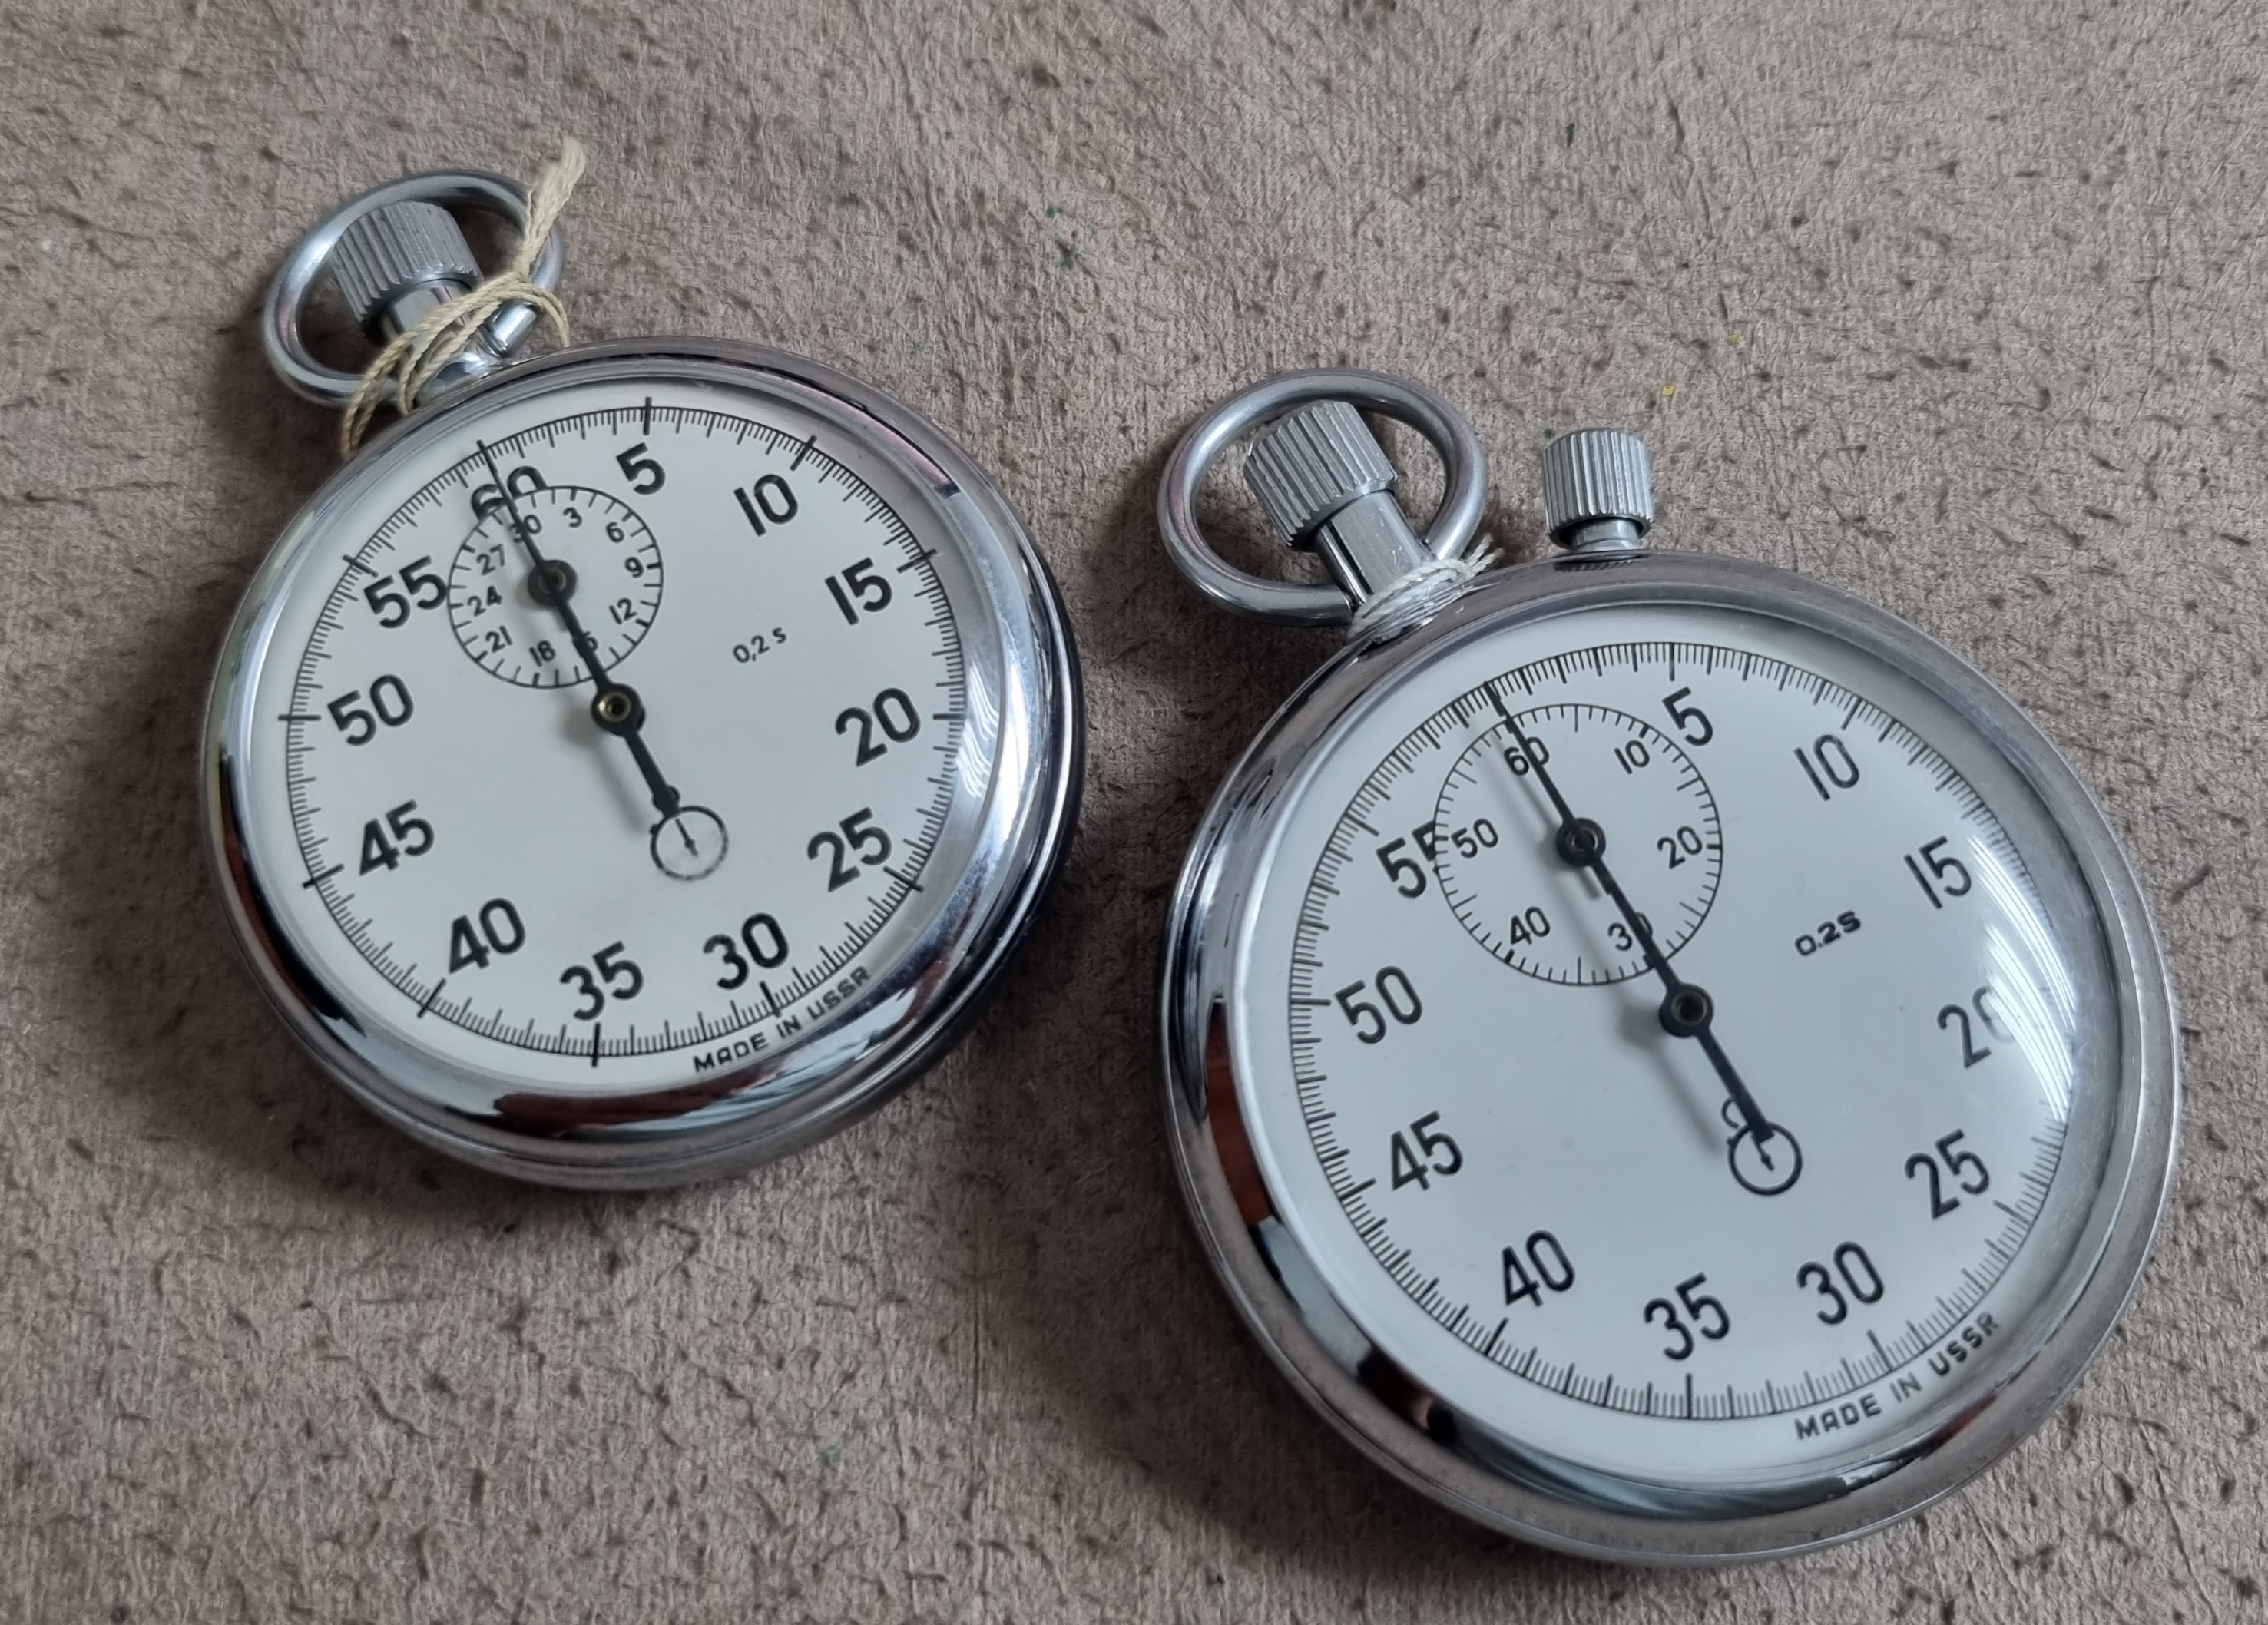 Anonimo Vintage pair Mechanical 0,2s Stopwatch - Made in USSR - Good Working Order - Newoldstock | San Giorgio a Cremano